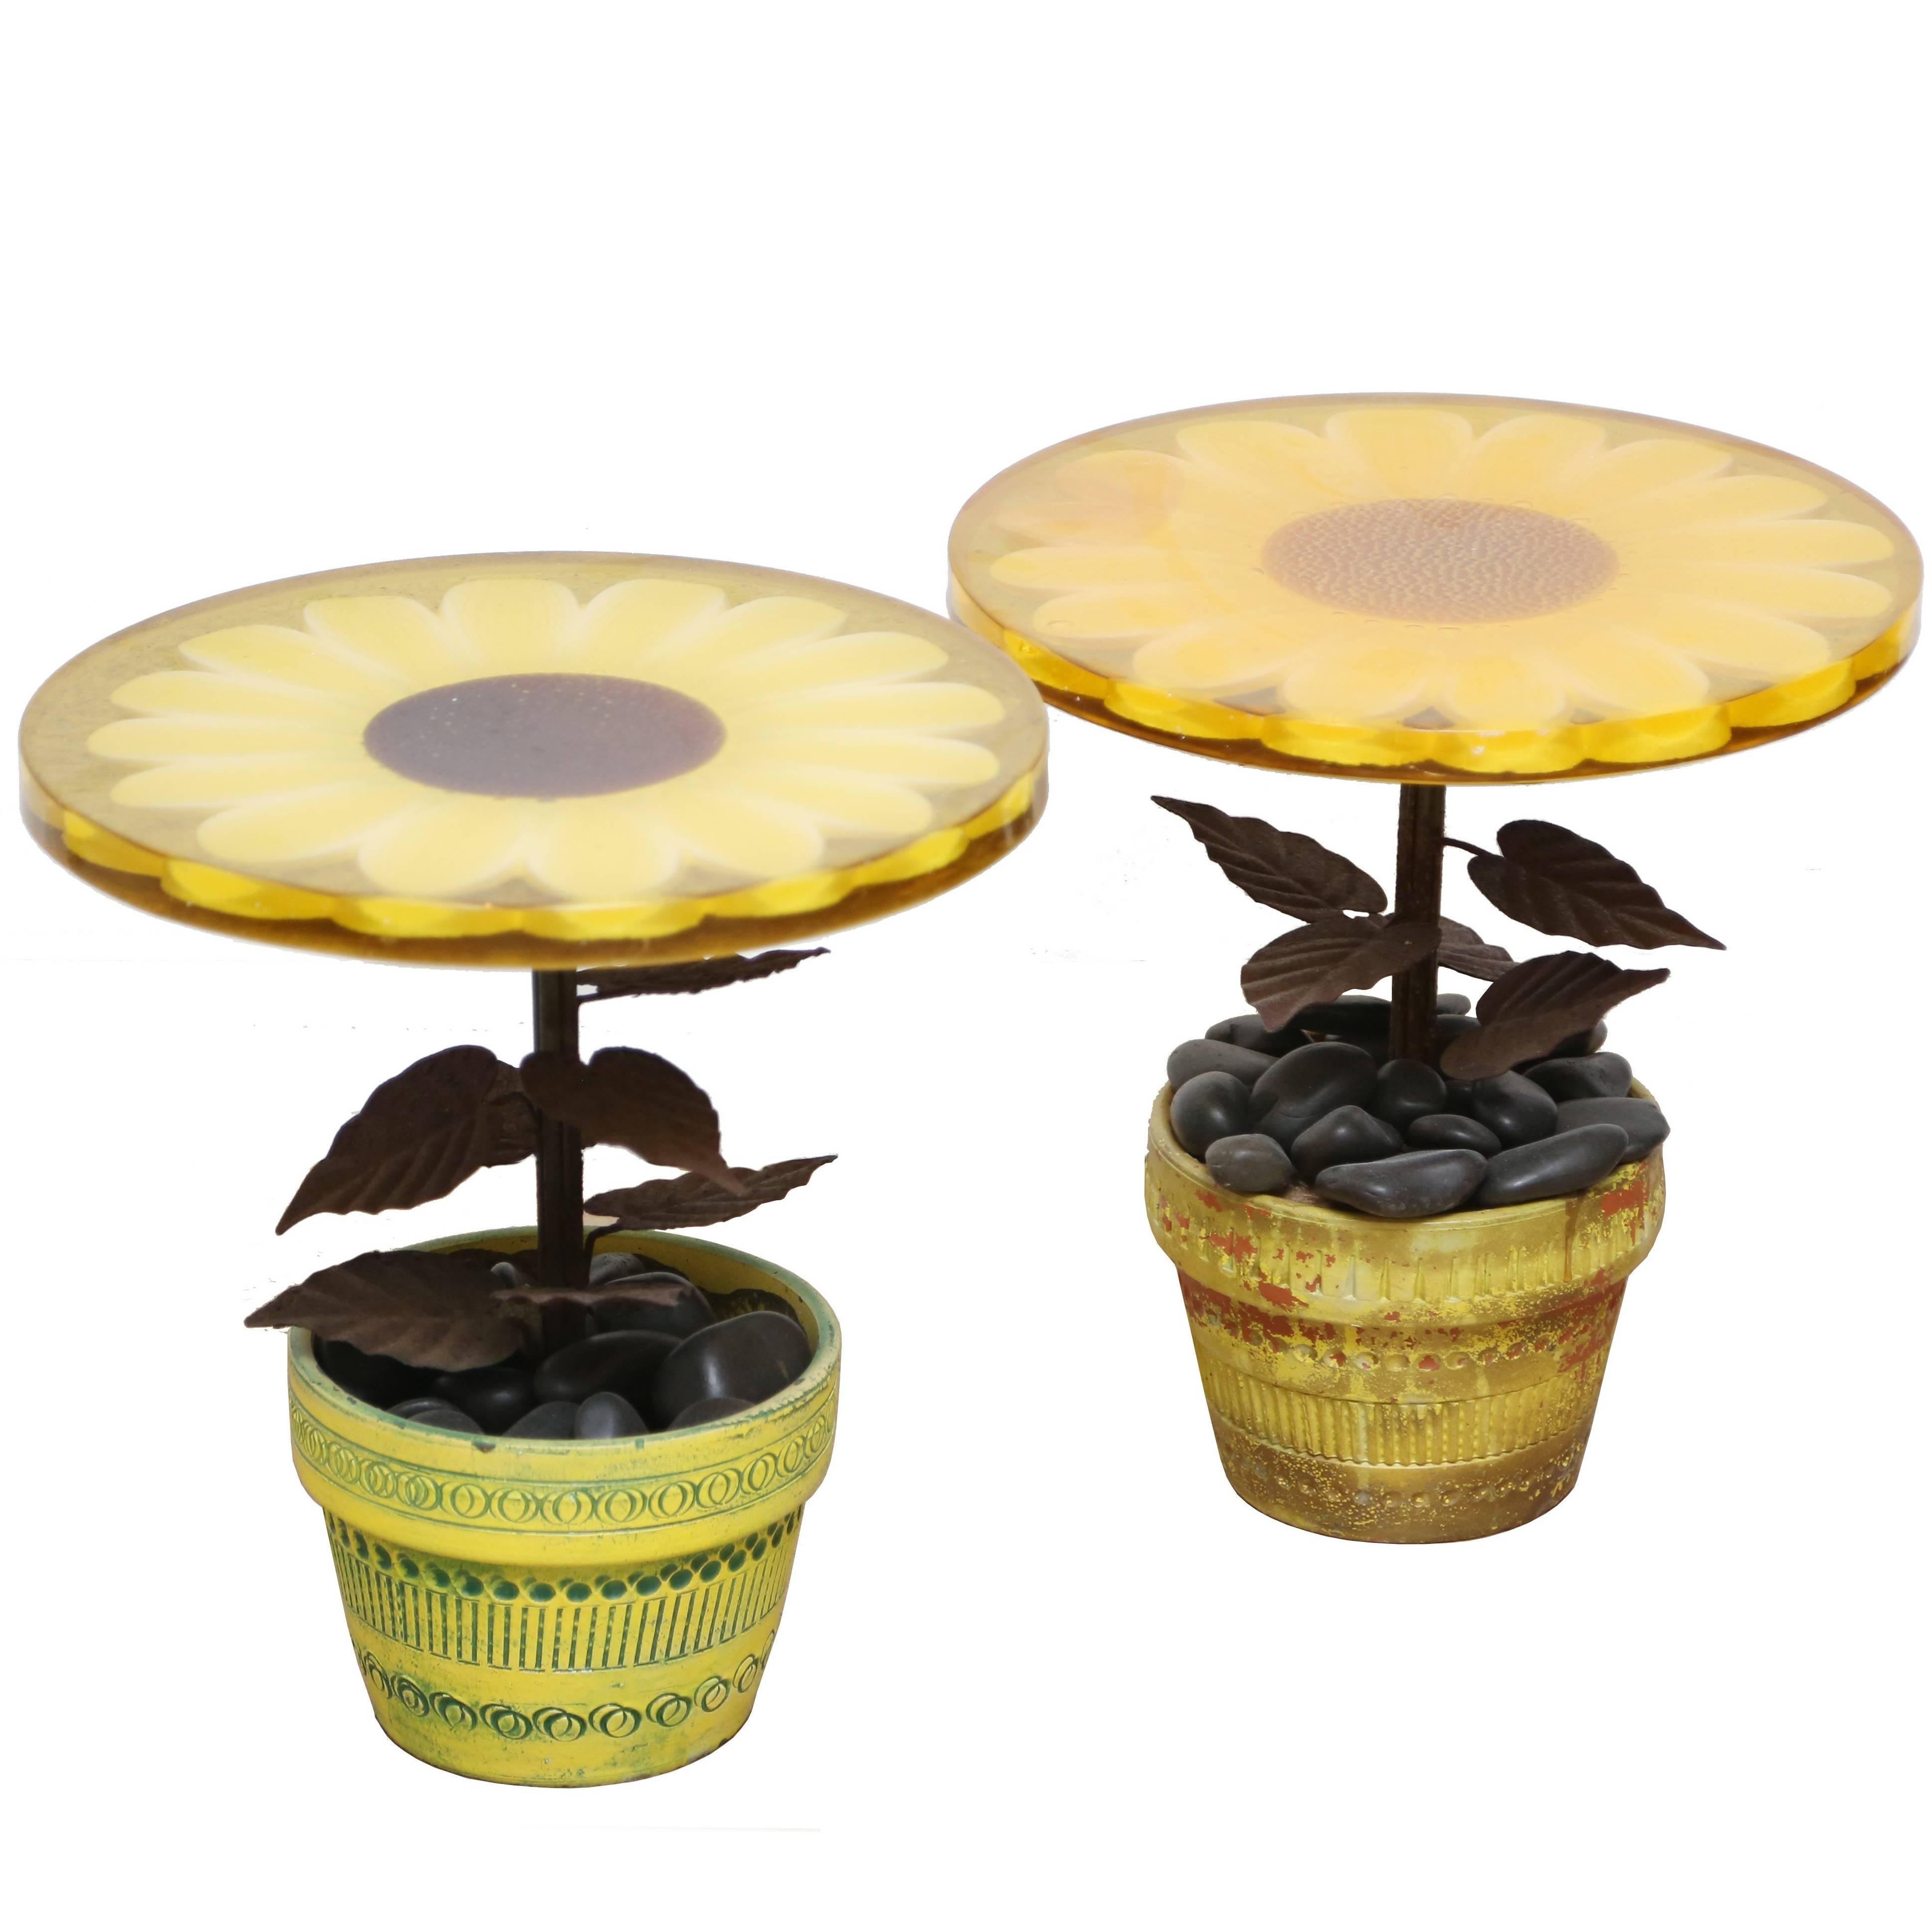 Pair of Whimsical Side Tables.